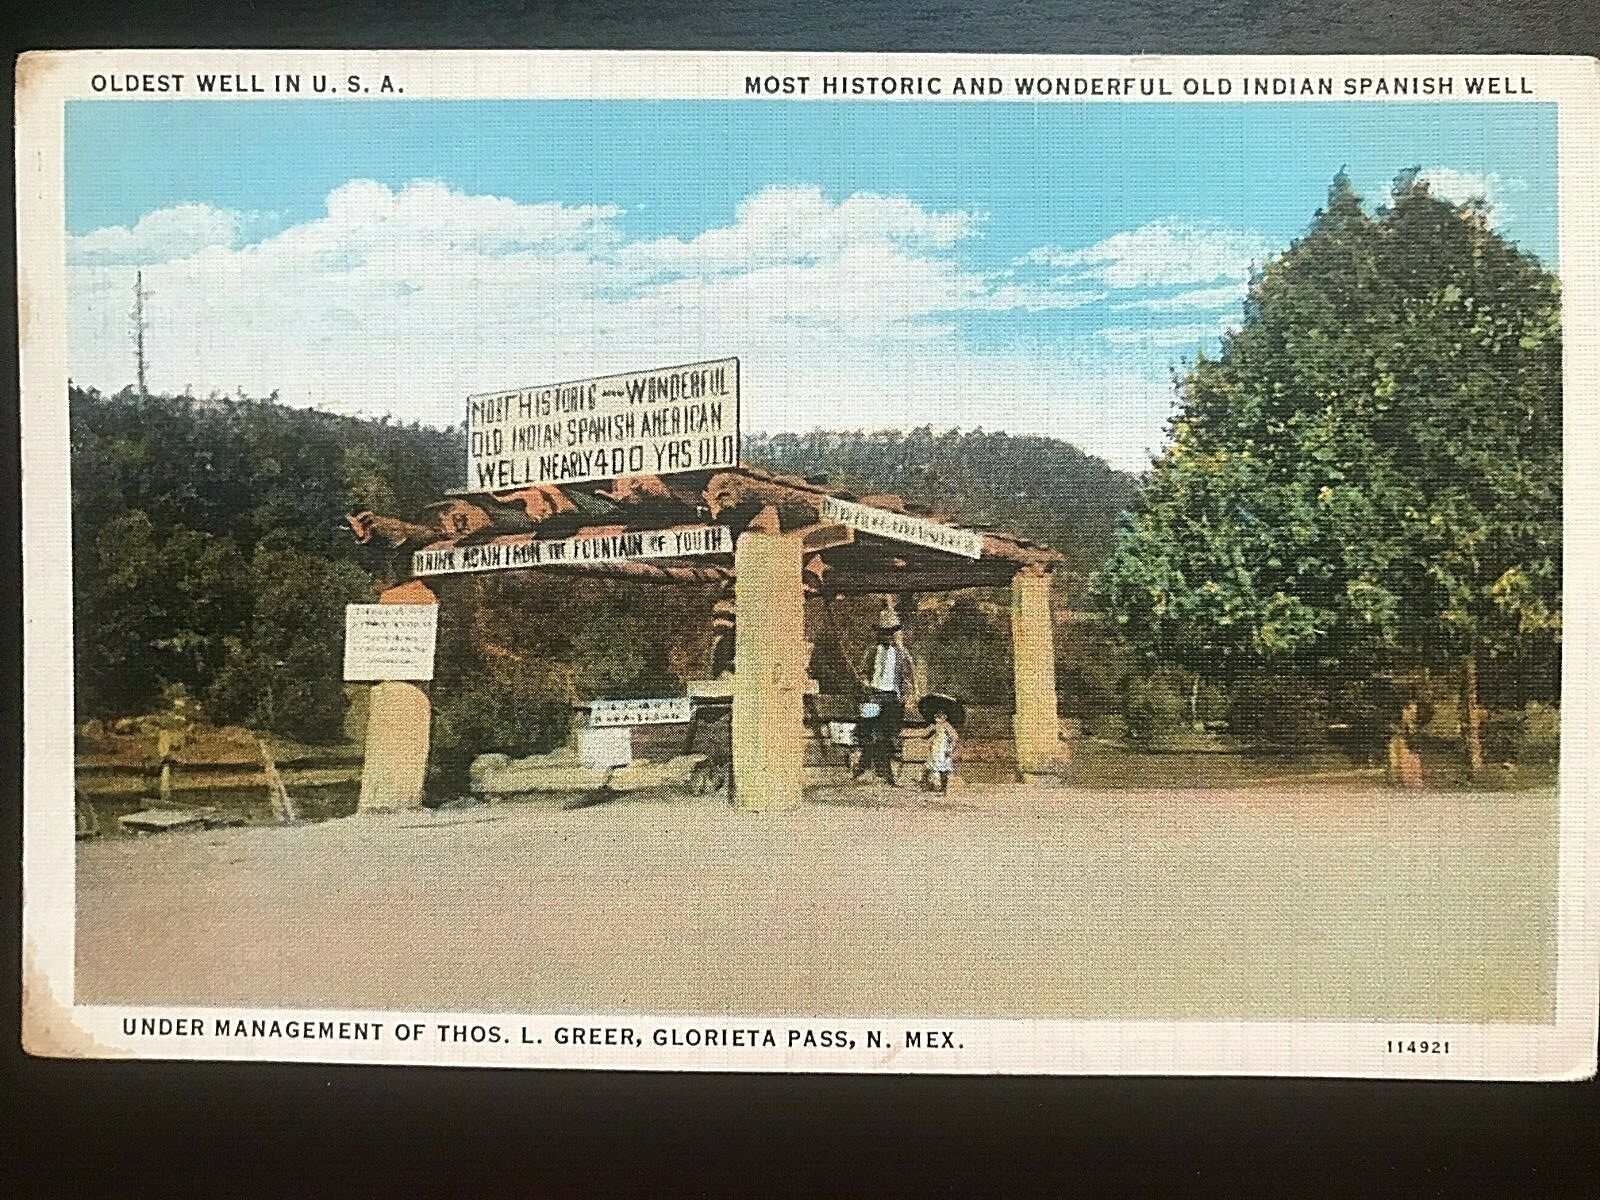 Vintage Postcard 1930-1945 Oldest Well in the U.S.A. Glorieta Pass New Mexico